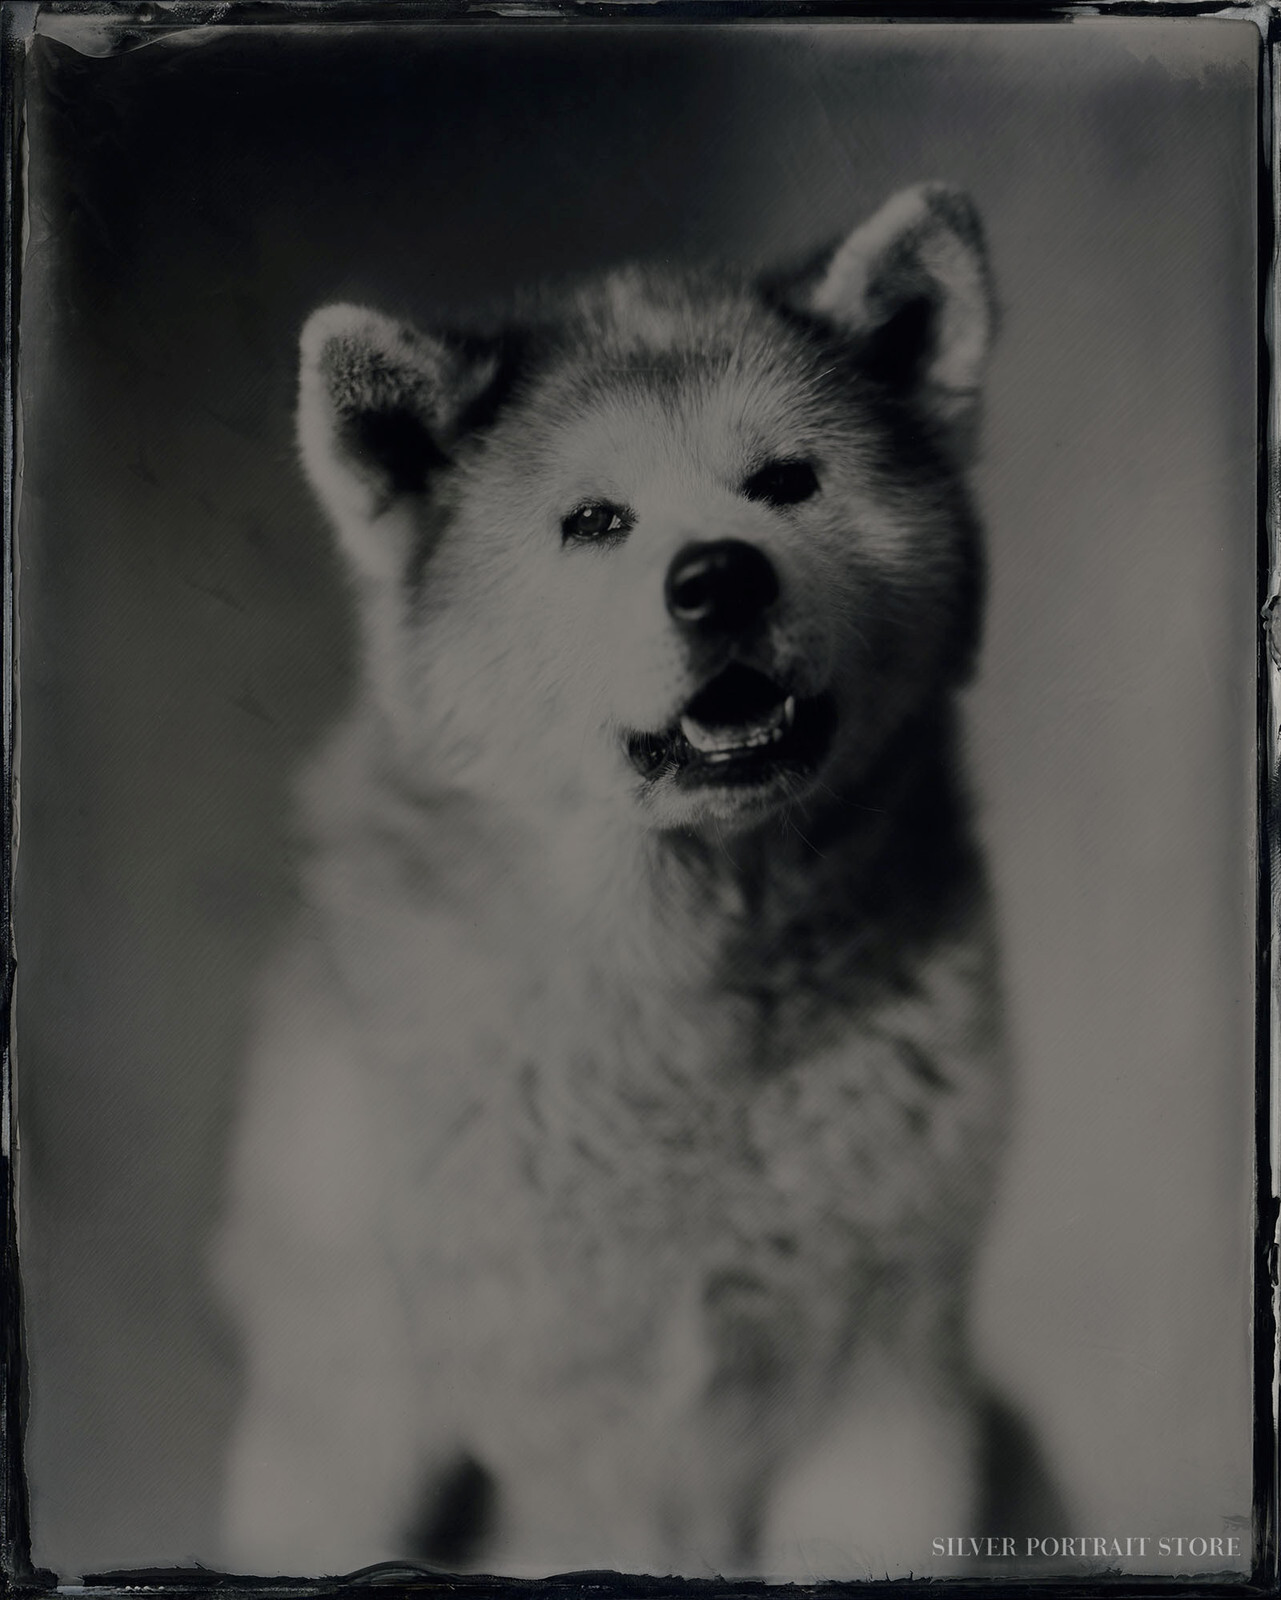 Kiko-Silver Portrait Store-scan from Wet plate collodion-Black glass Ambrotype 20 x 25 cm.